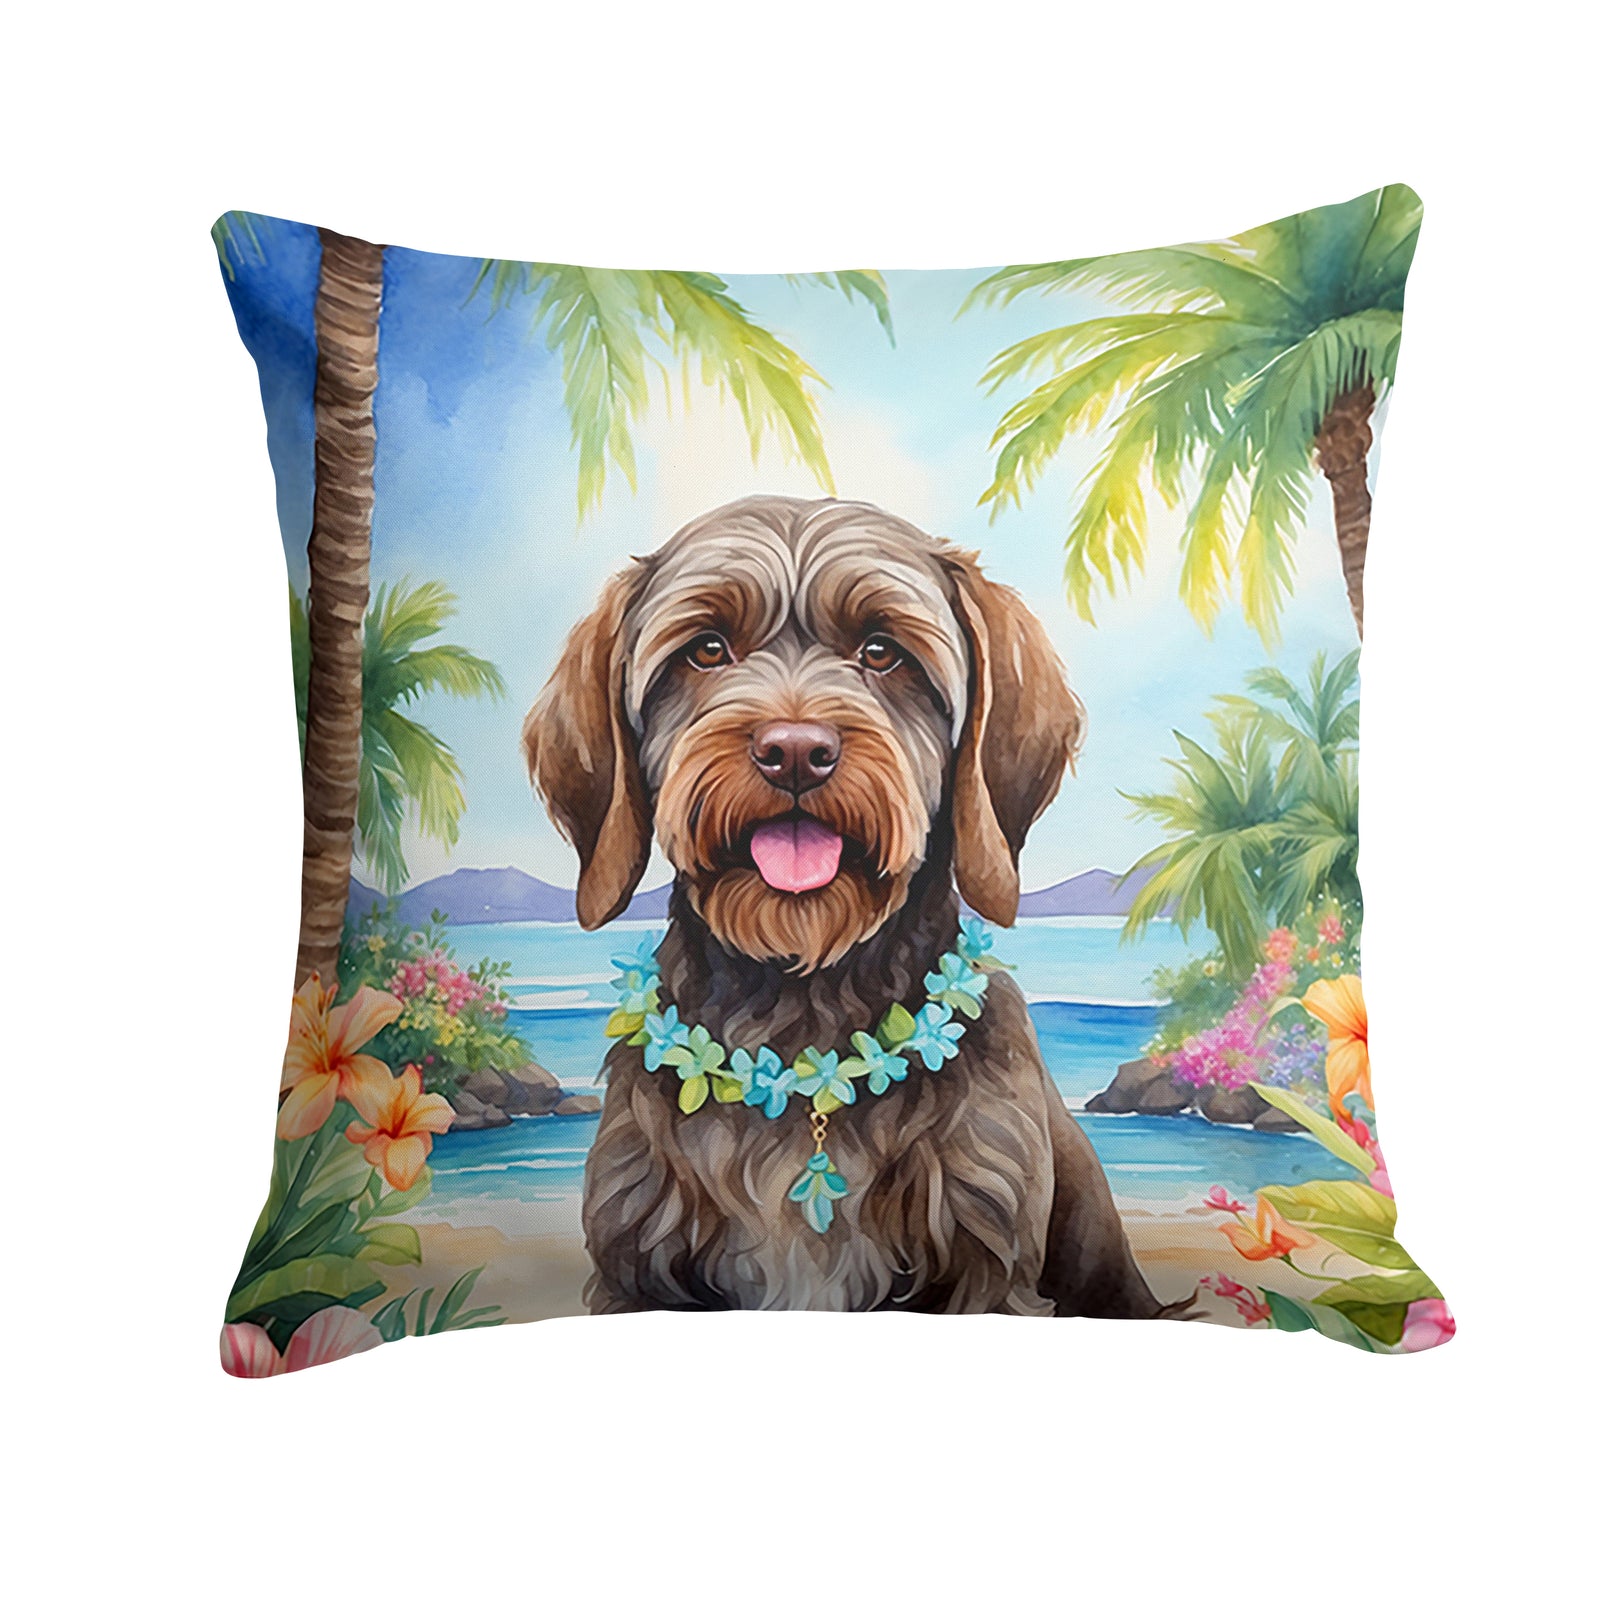 Buy this Wirehaired Pointing Griffon Luau Throw Pillow